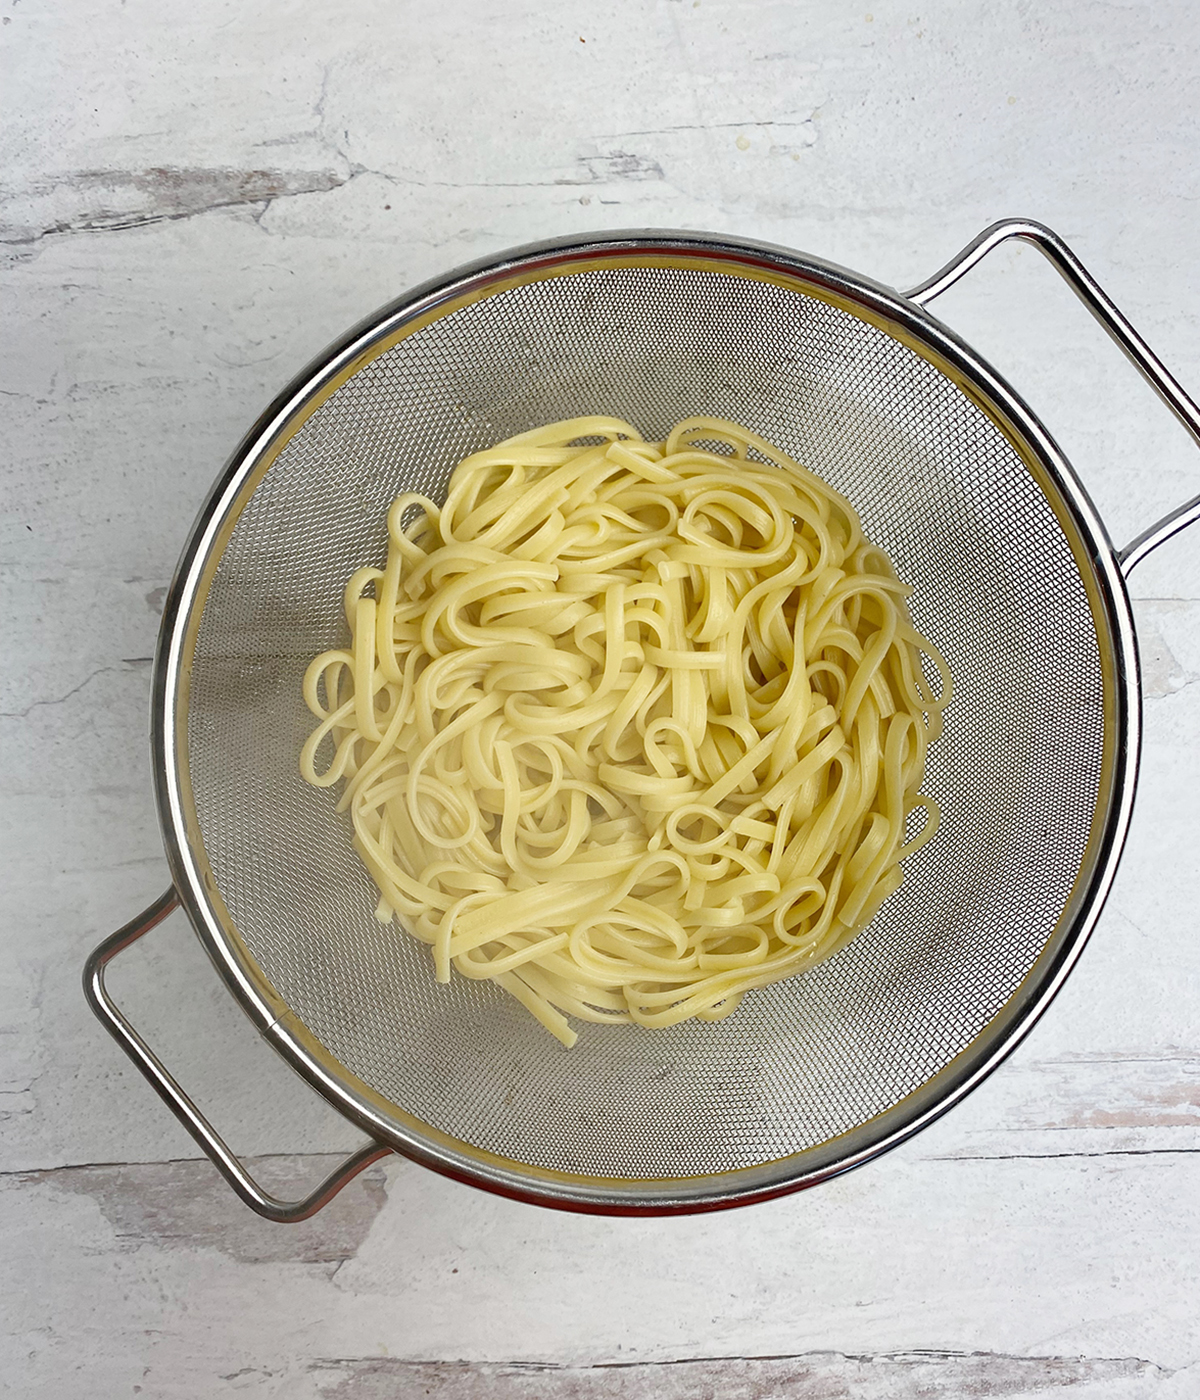 Cooked pasta draining in a colander.